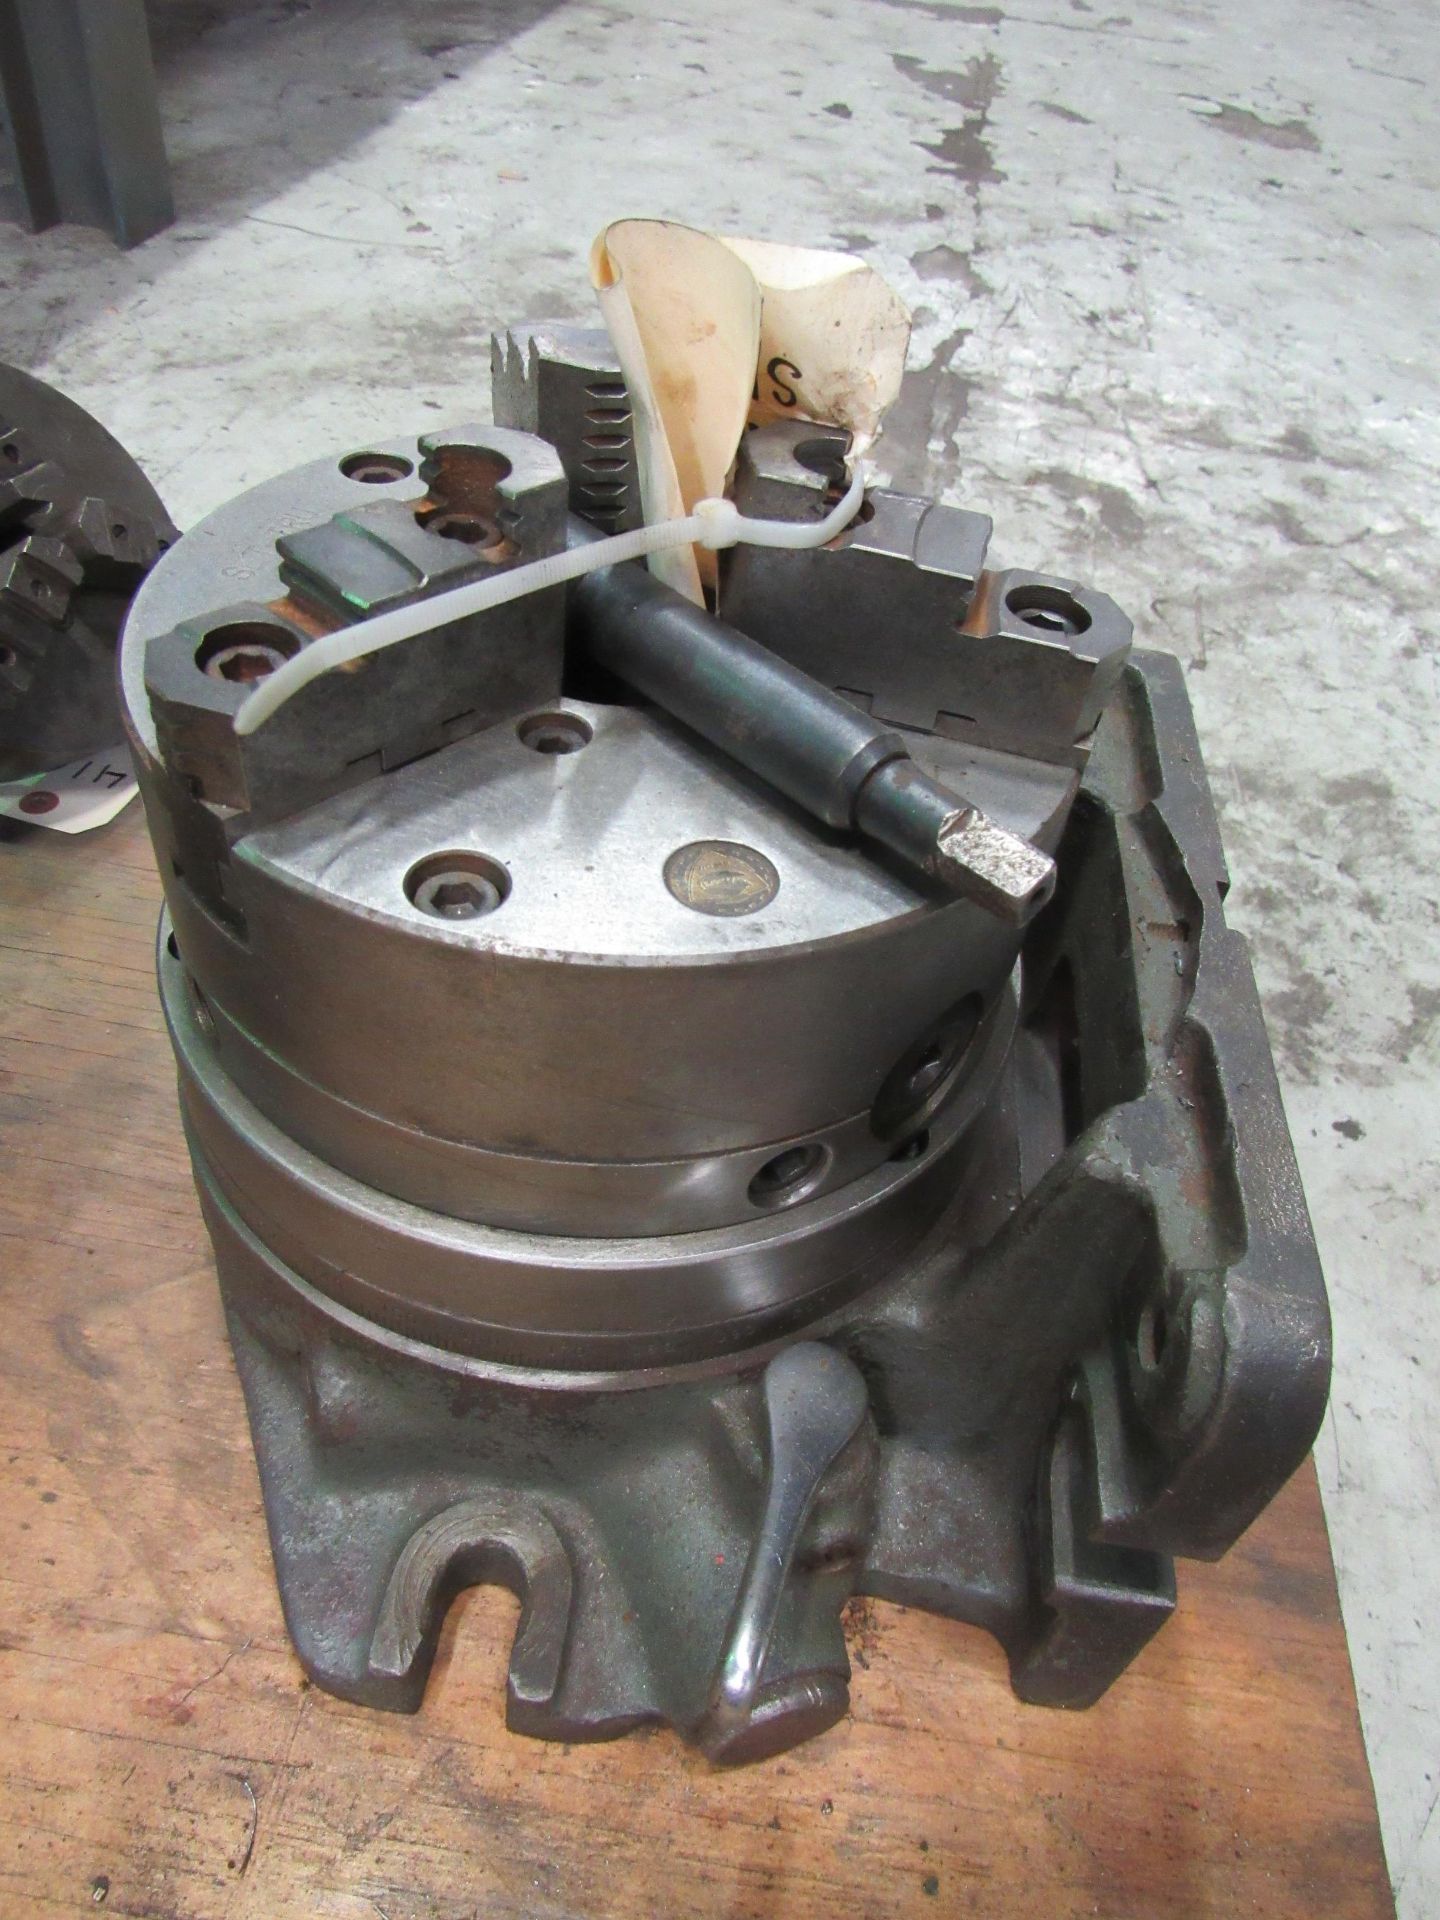 8" 3-Jaw Hartford Special Super Spacer Index Table, 8" dia. 3-jaw chuck, non-cumulative indexing - Image 2 of 5